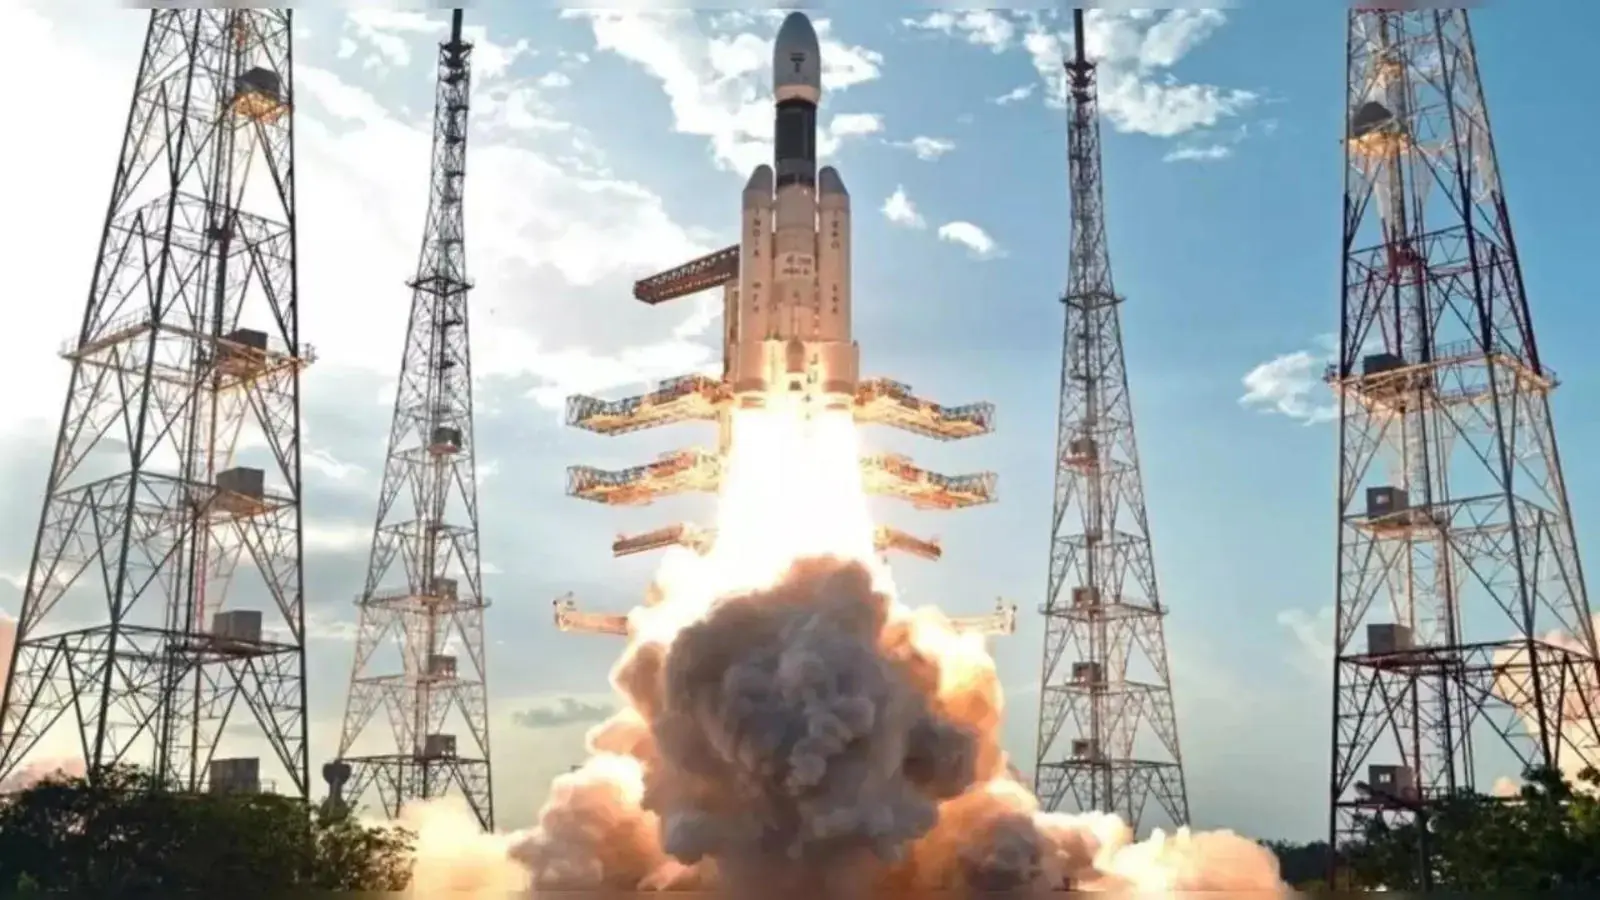 Another major success of Indian Space Research Organisation, lightweight nozzle prepared for rocket engines